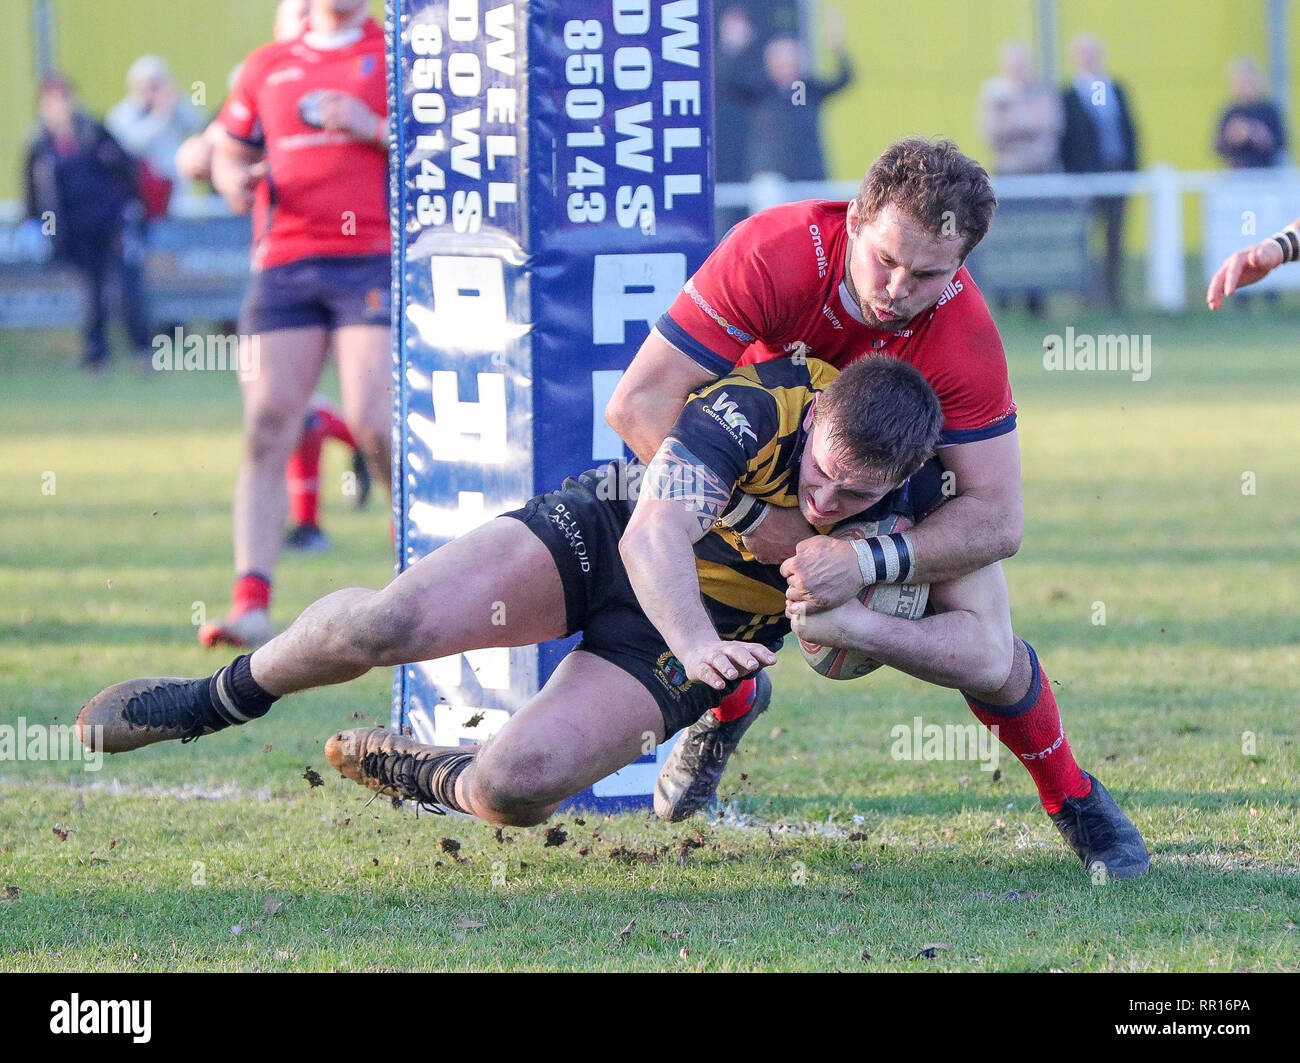 23.02.2019 Hinckley, Leicester, England. Rugby Union, Hinckley rfc v Chester rfc.  Callum Dacey scores the 3rd of his four trys for Hinckley in the 50 Stock Photo